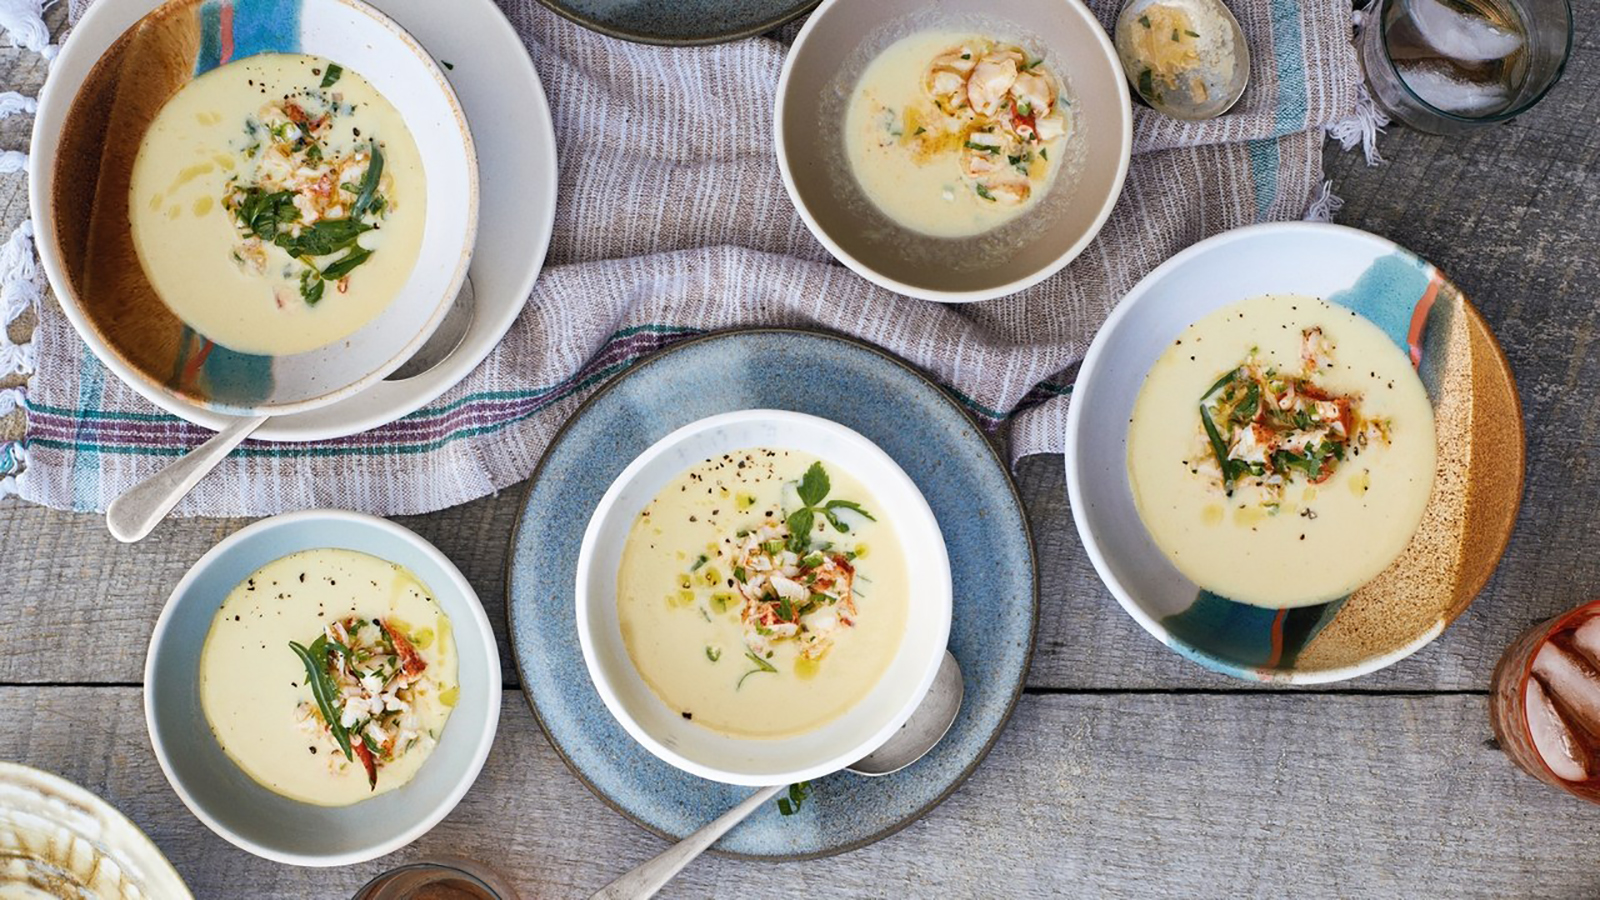 Make a chilled soup, because it's 100 degrees outside.